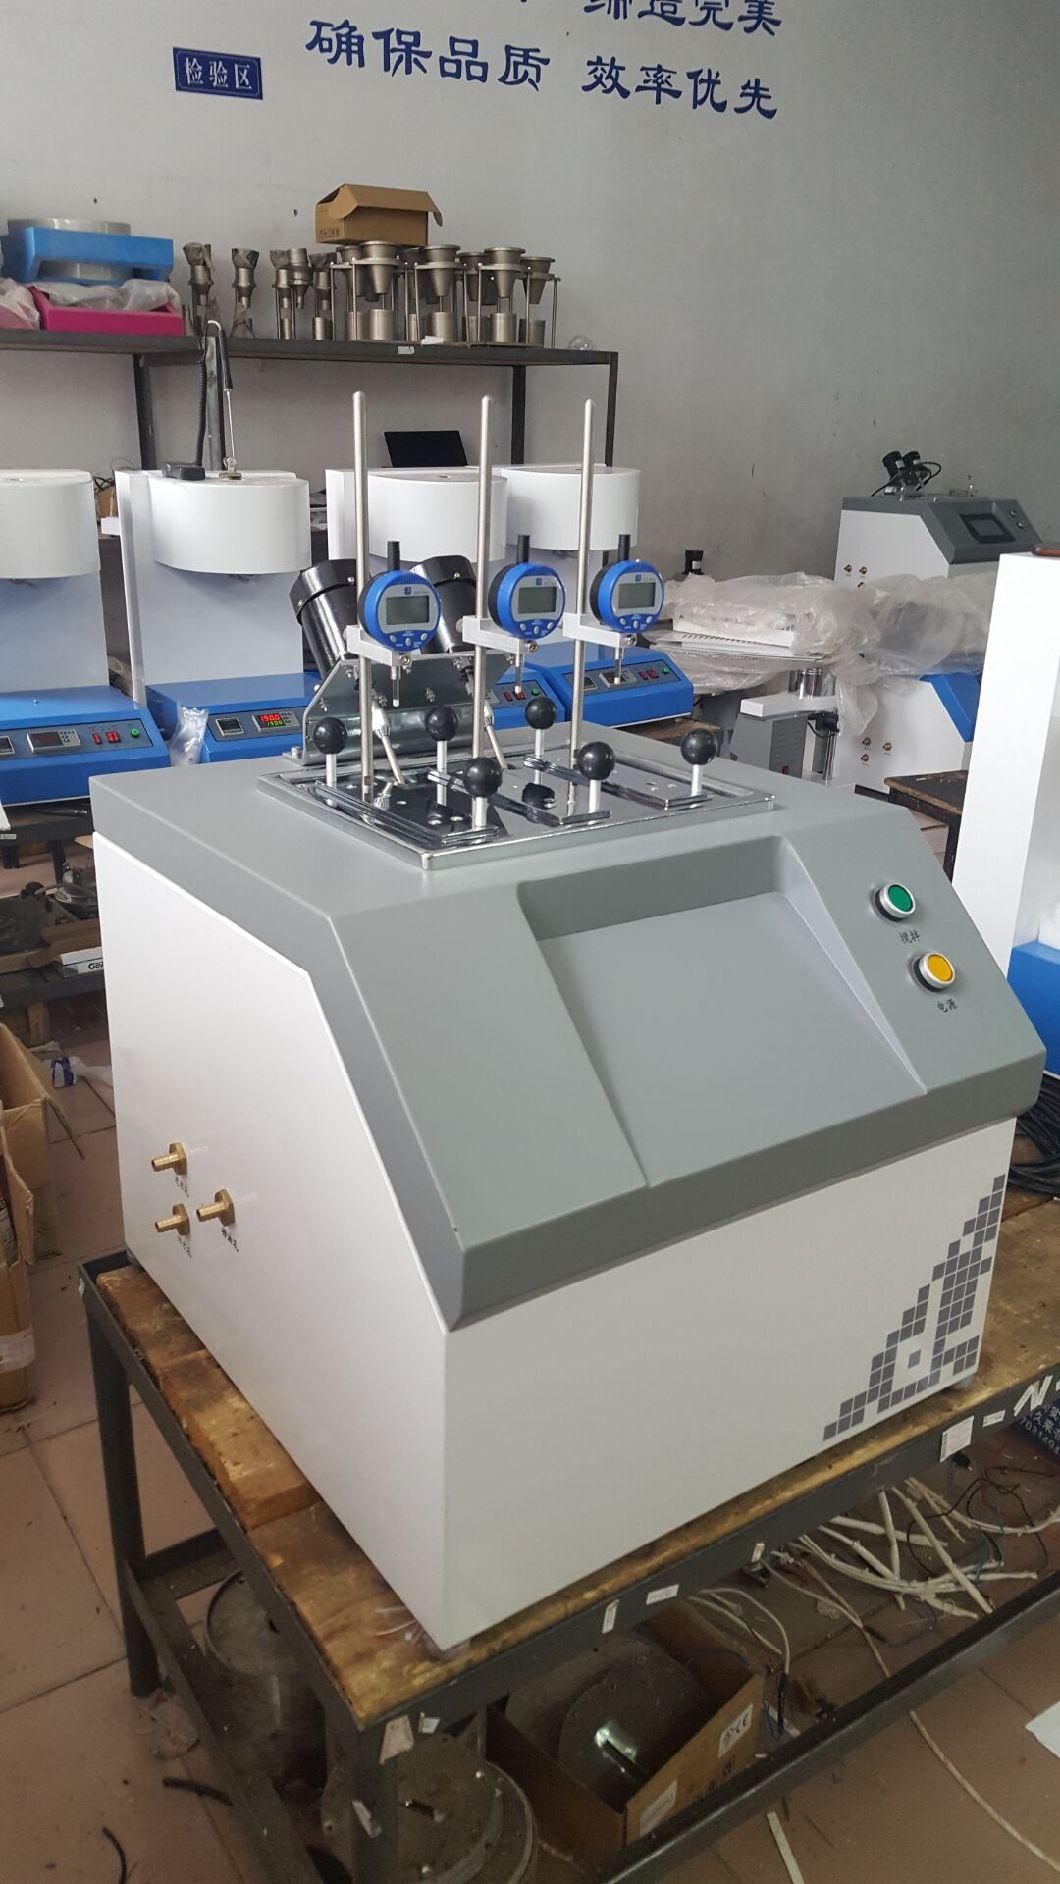 ERW-300ub Is075 (E) Is0306 (E) Plastic Softening Temperature Point Testing Machine Thermal Deformation and Vicat Softening Point Tester with Sample Rack Lifting